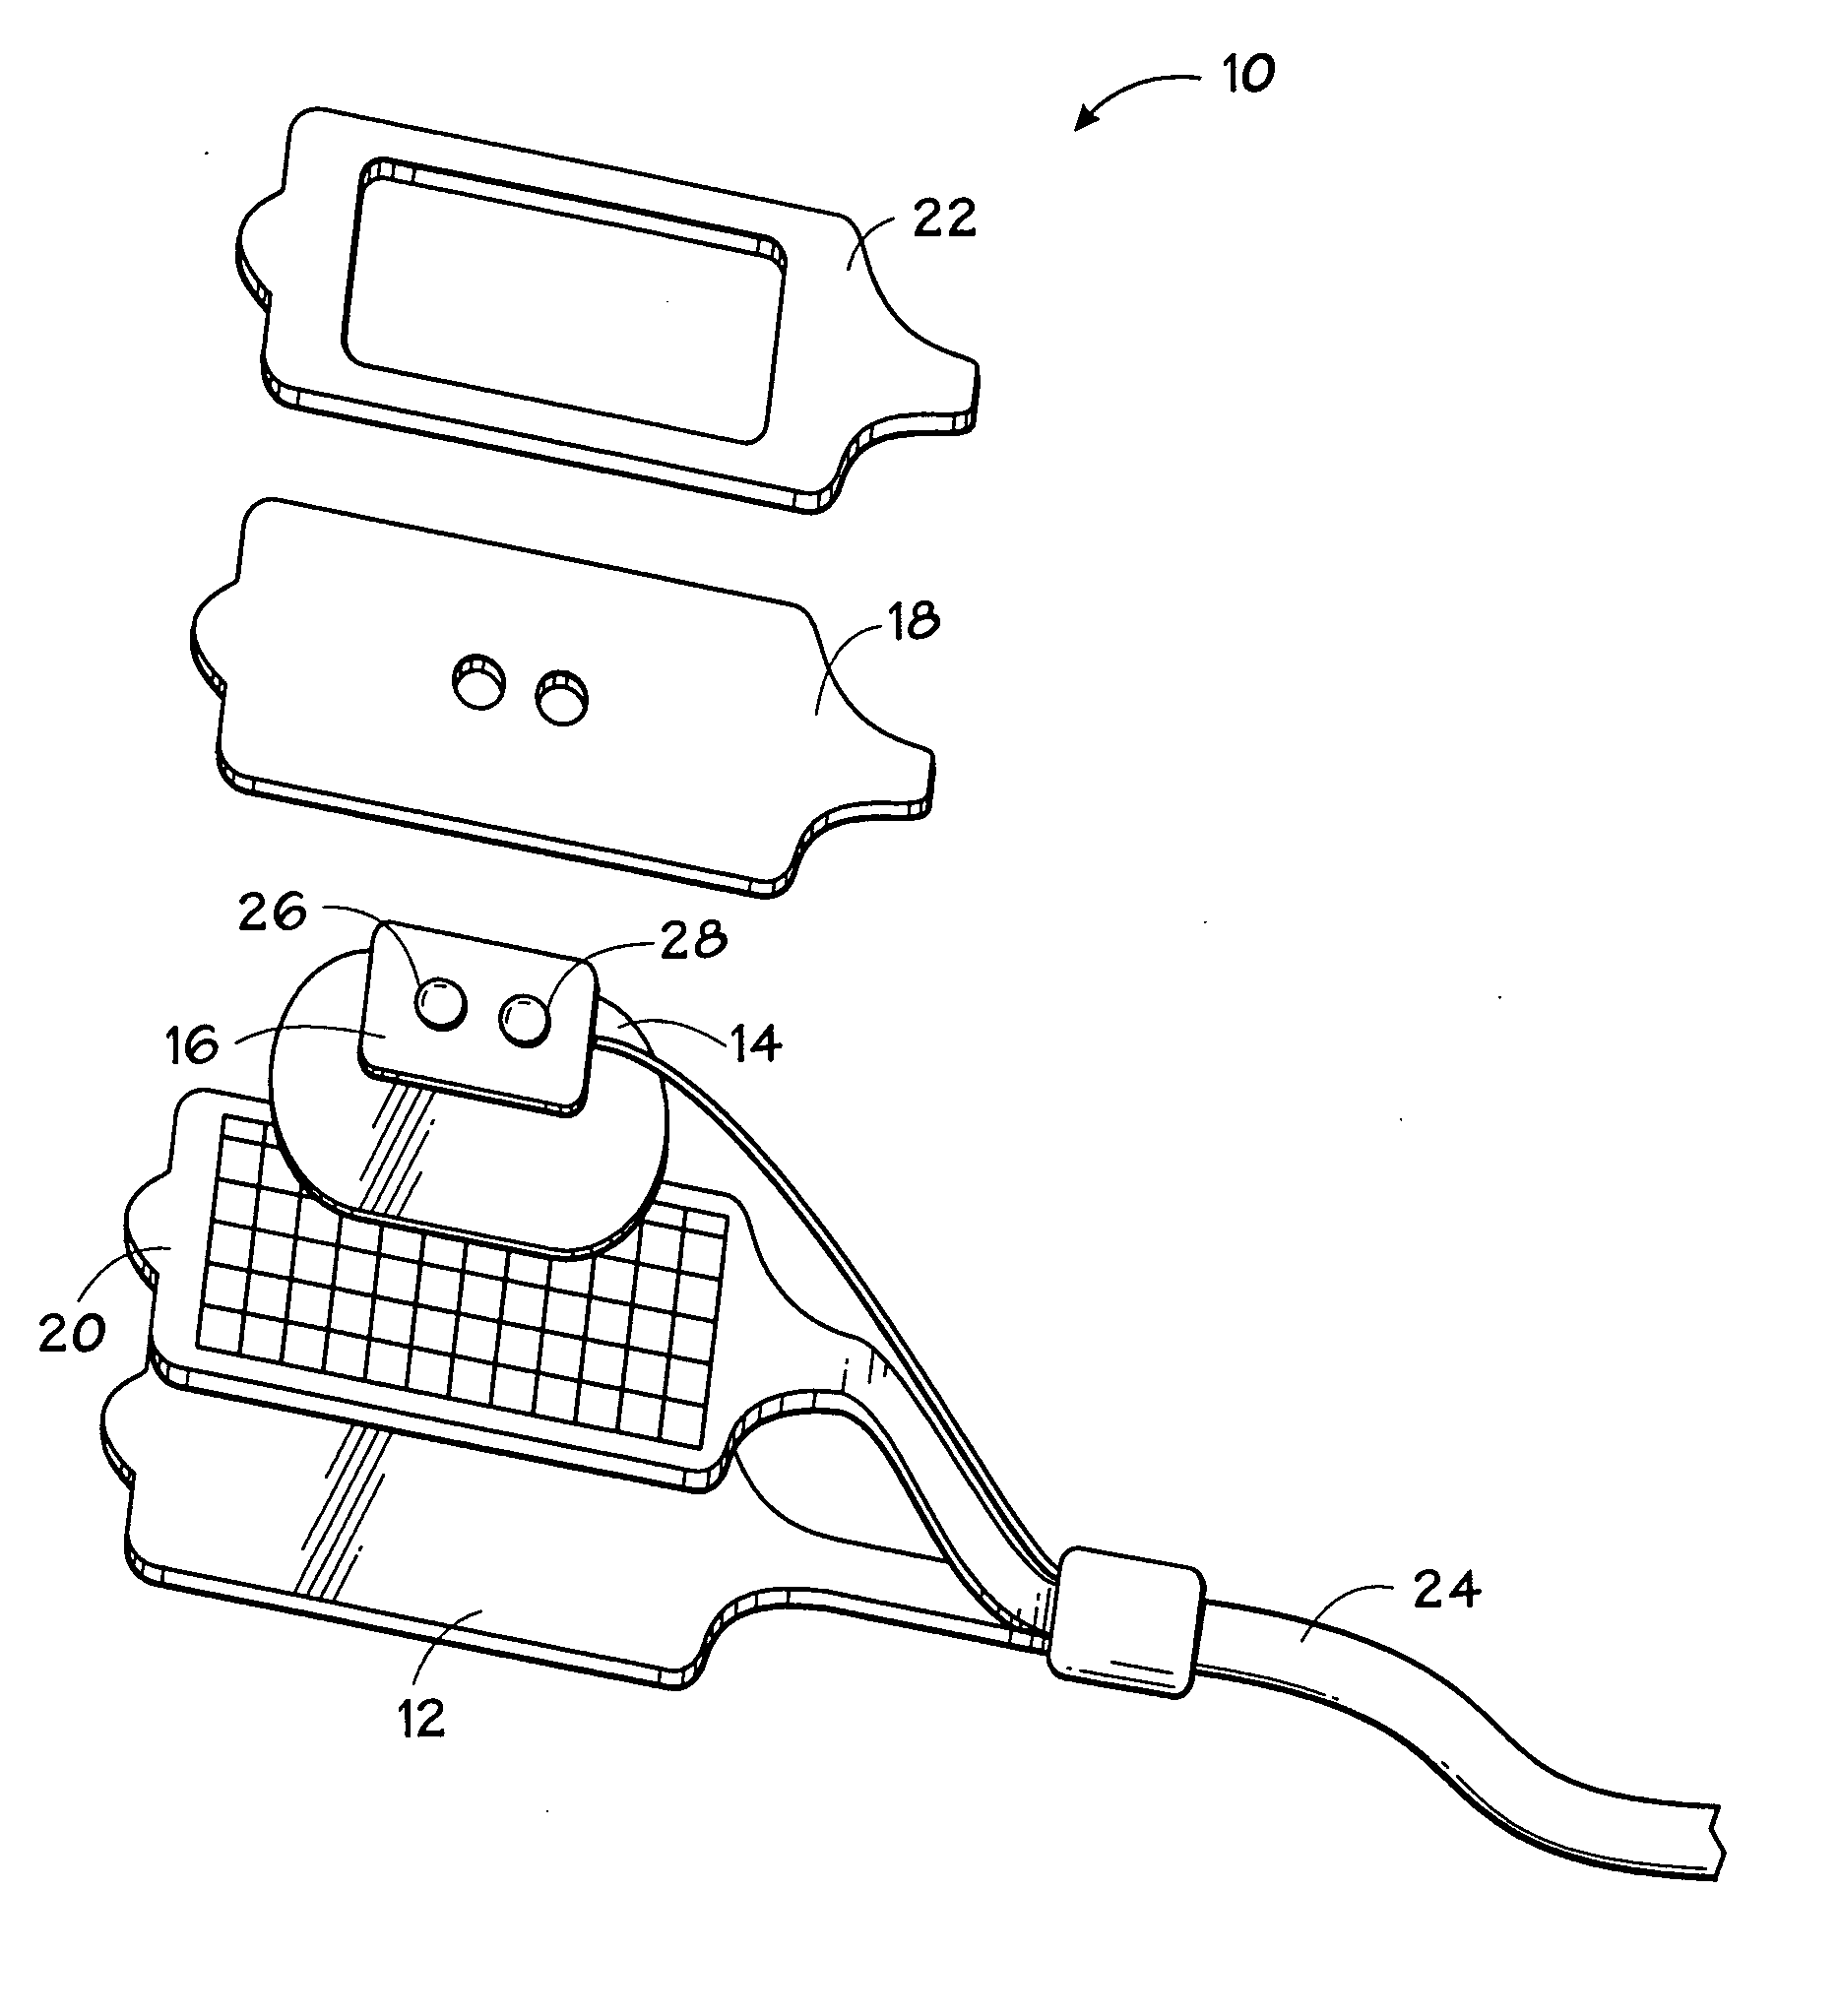 Method and system for monitoring intracranial pressure